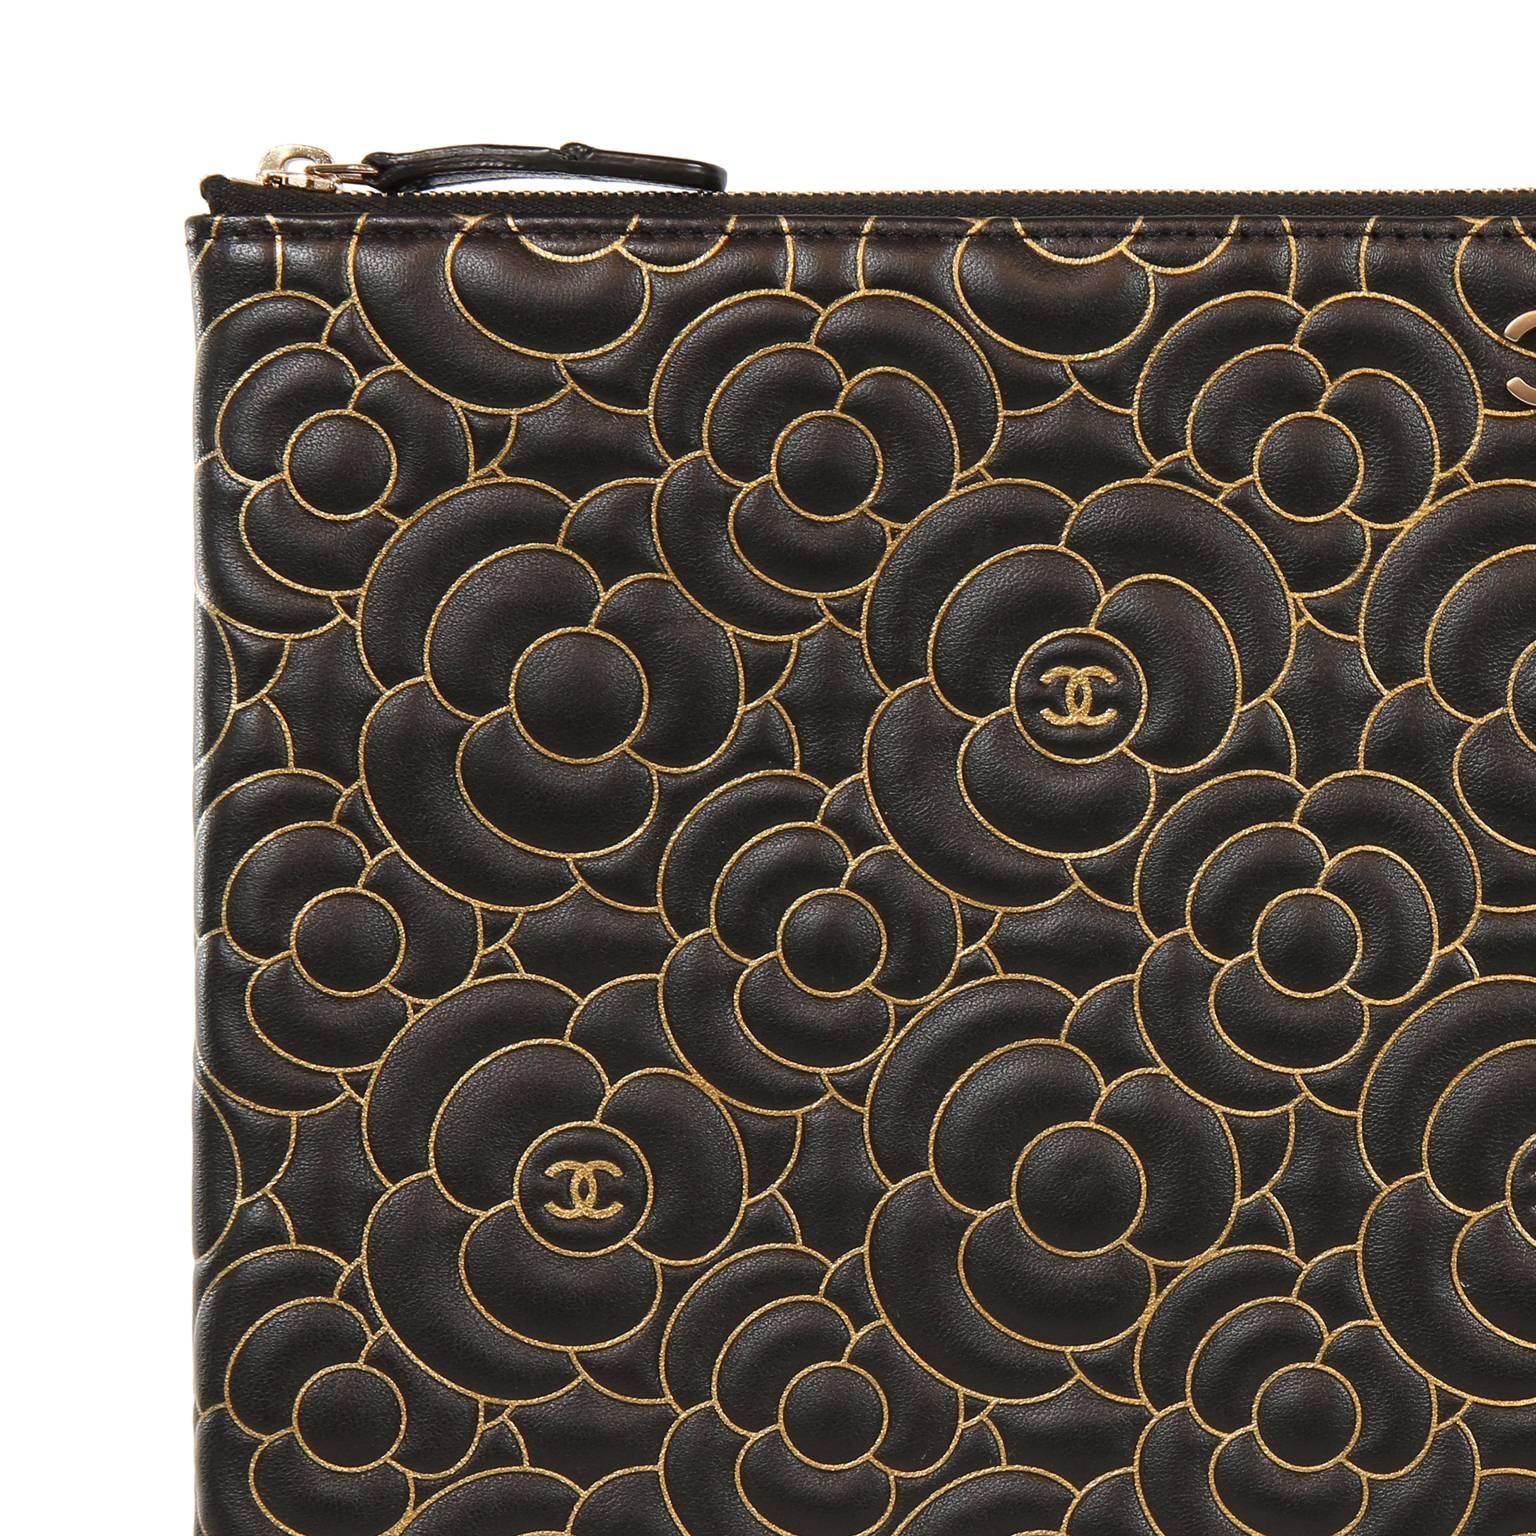 Women's Chanel Black Leather Quilted Camellia Clutch